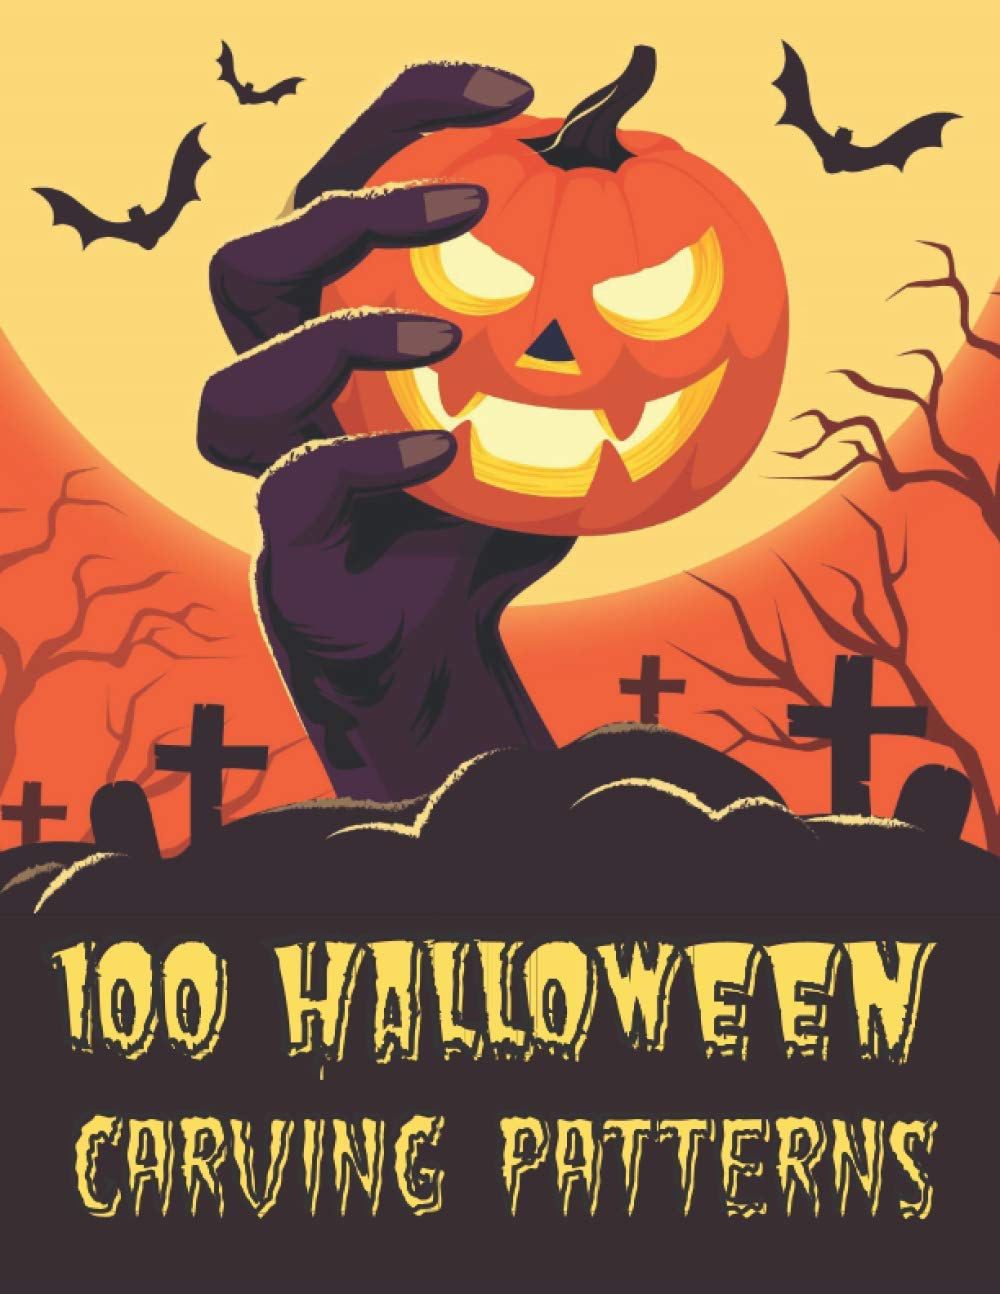 100 Halloween Carving Patterns: The perfect Halloween pumpkin carving stencil book - DIY - For All Ages and Skills. 50 Fun Stencils fit for kids and a (Halloween Crafts #3)